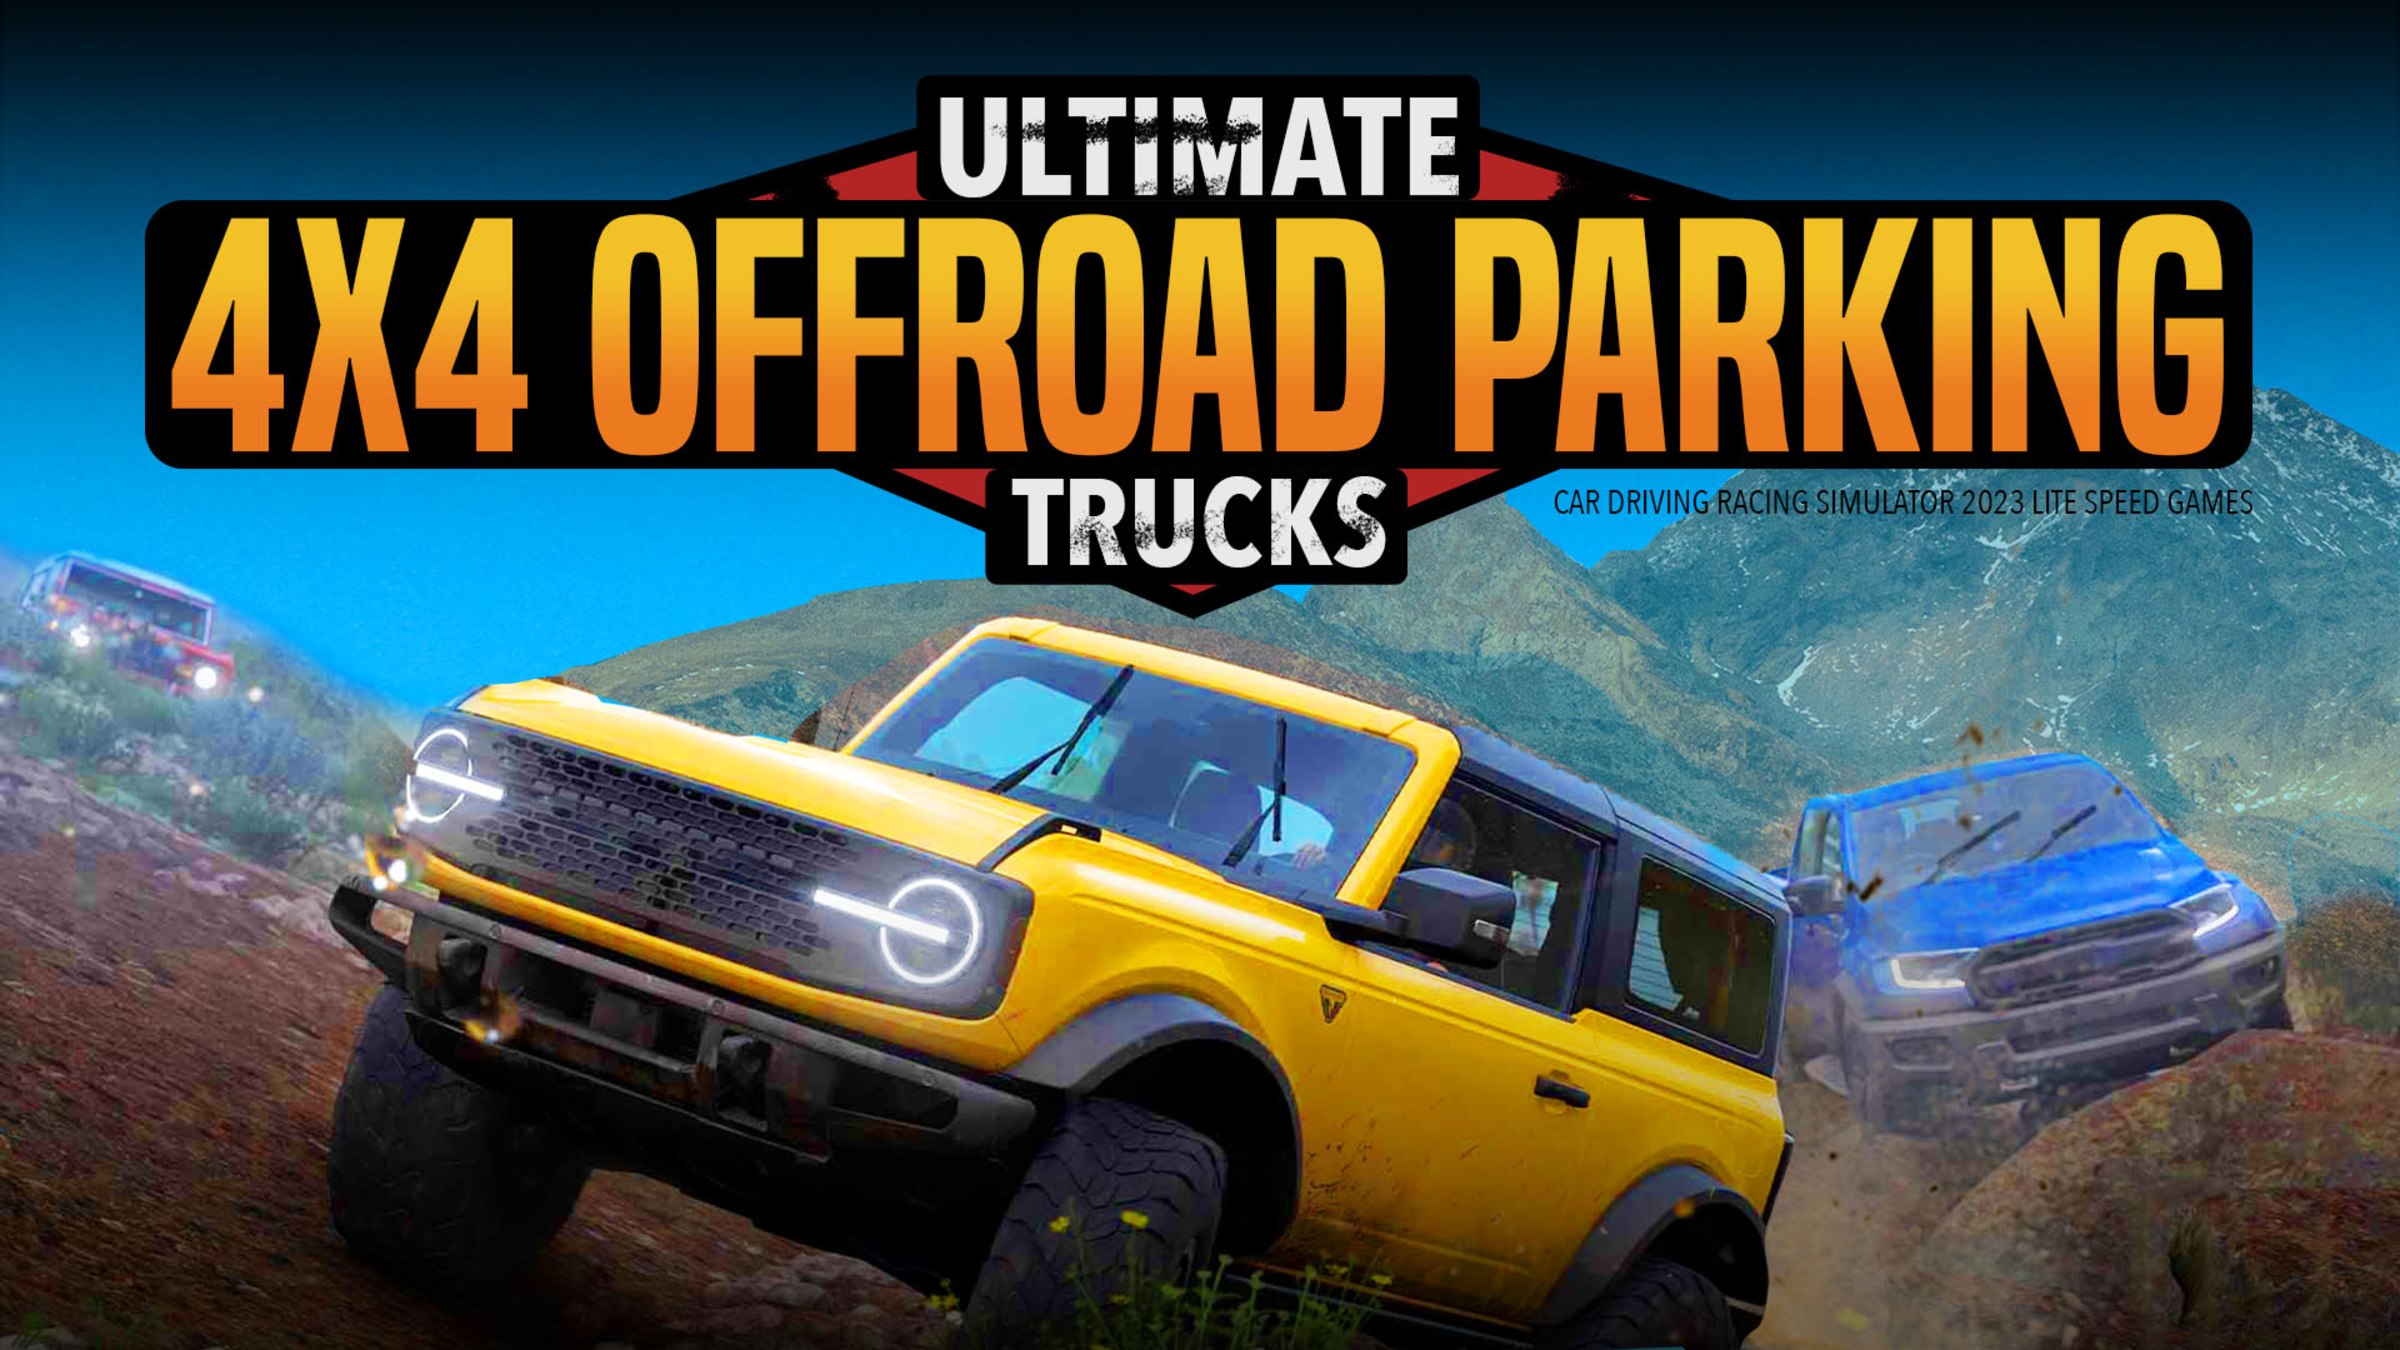 Ultimate 4x4 Offroad Parking Trucks :Car Driving Racing Simulator 2023 LITE  Speed Games for Nintendo Switch - Nintendo Official Site